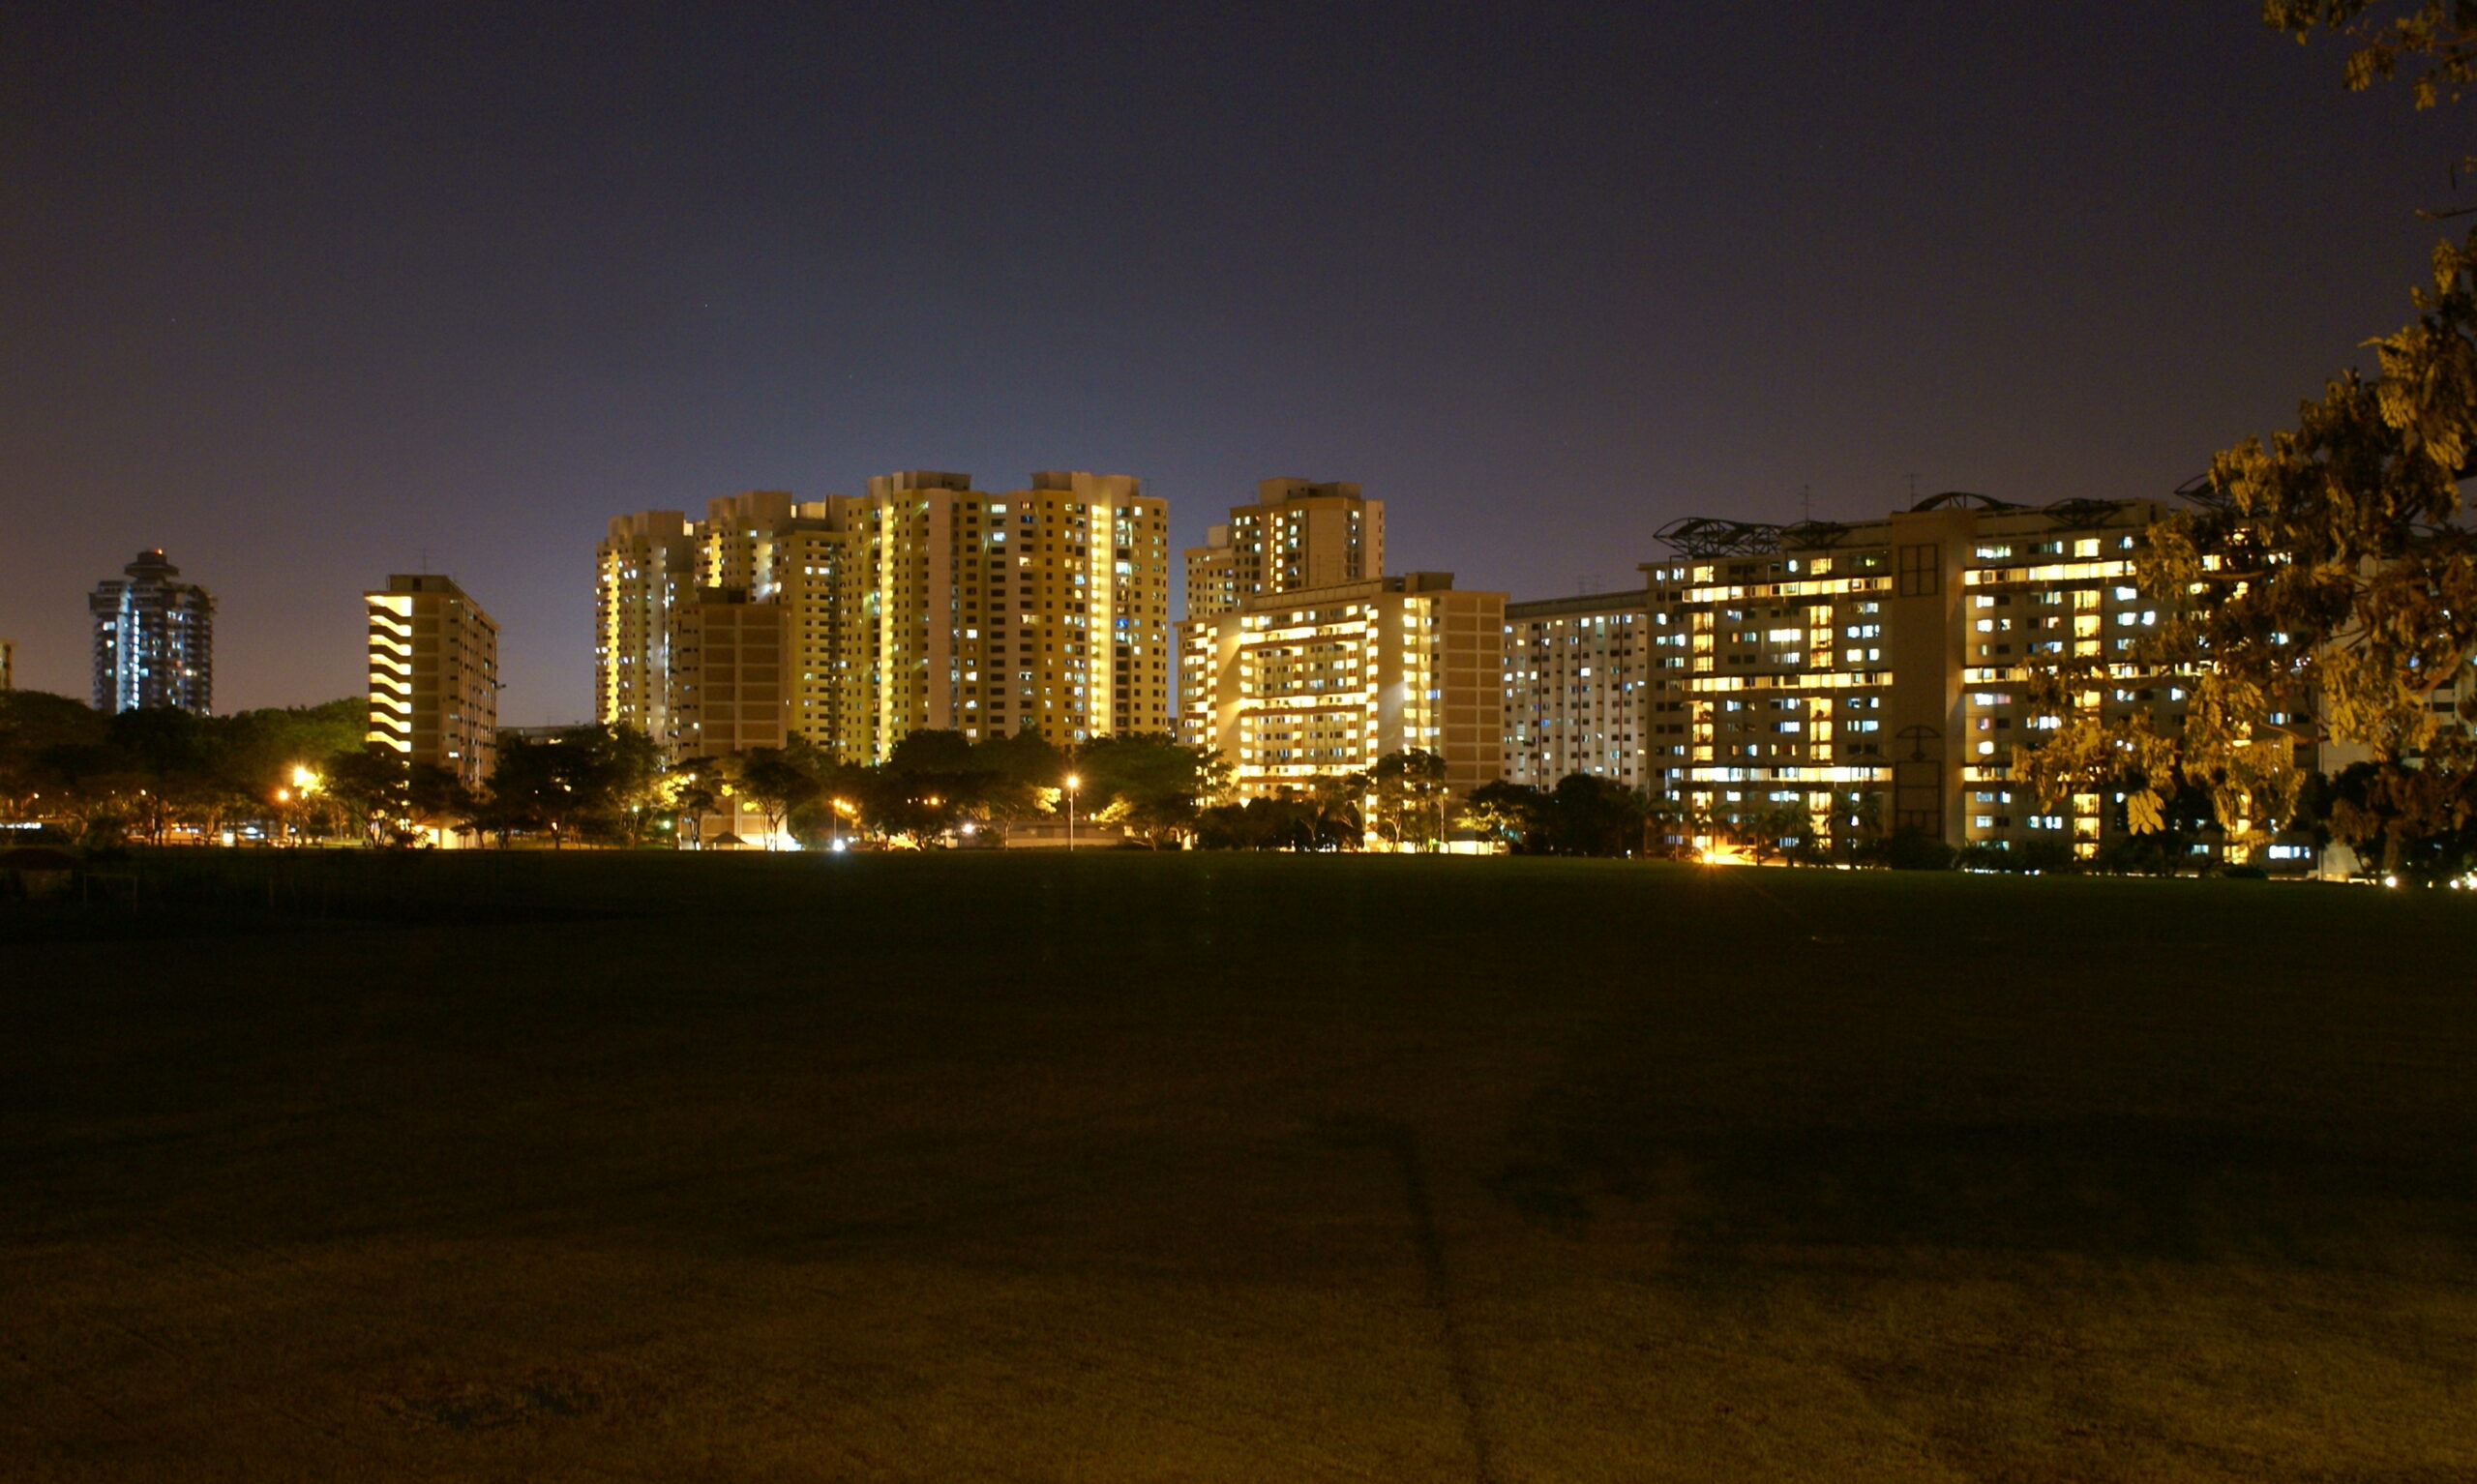 A wide, night shot of Clementi’s stretch of high-rise apartments